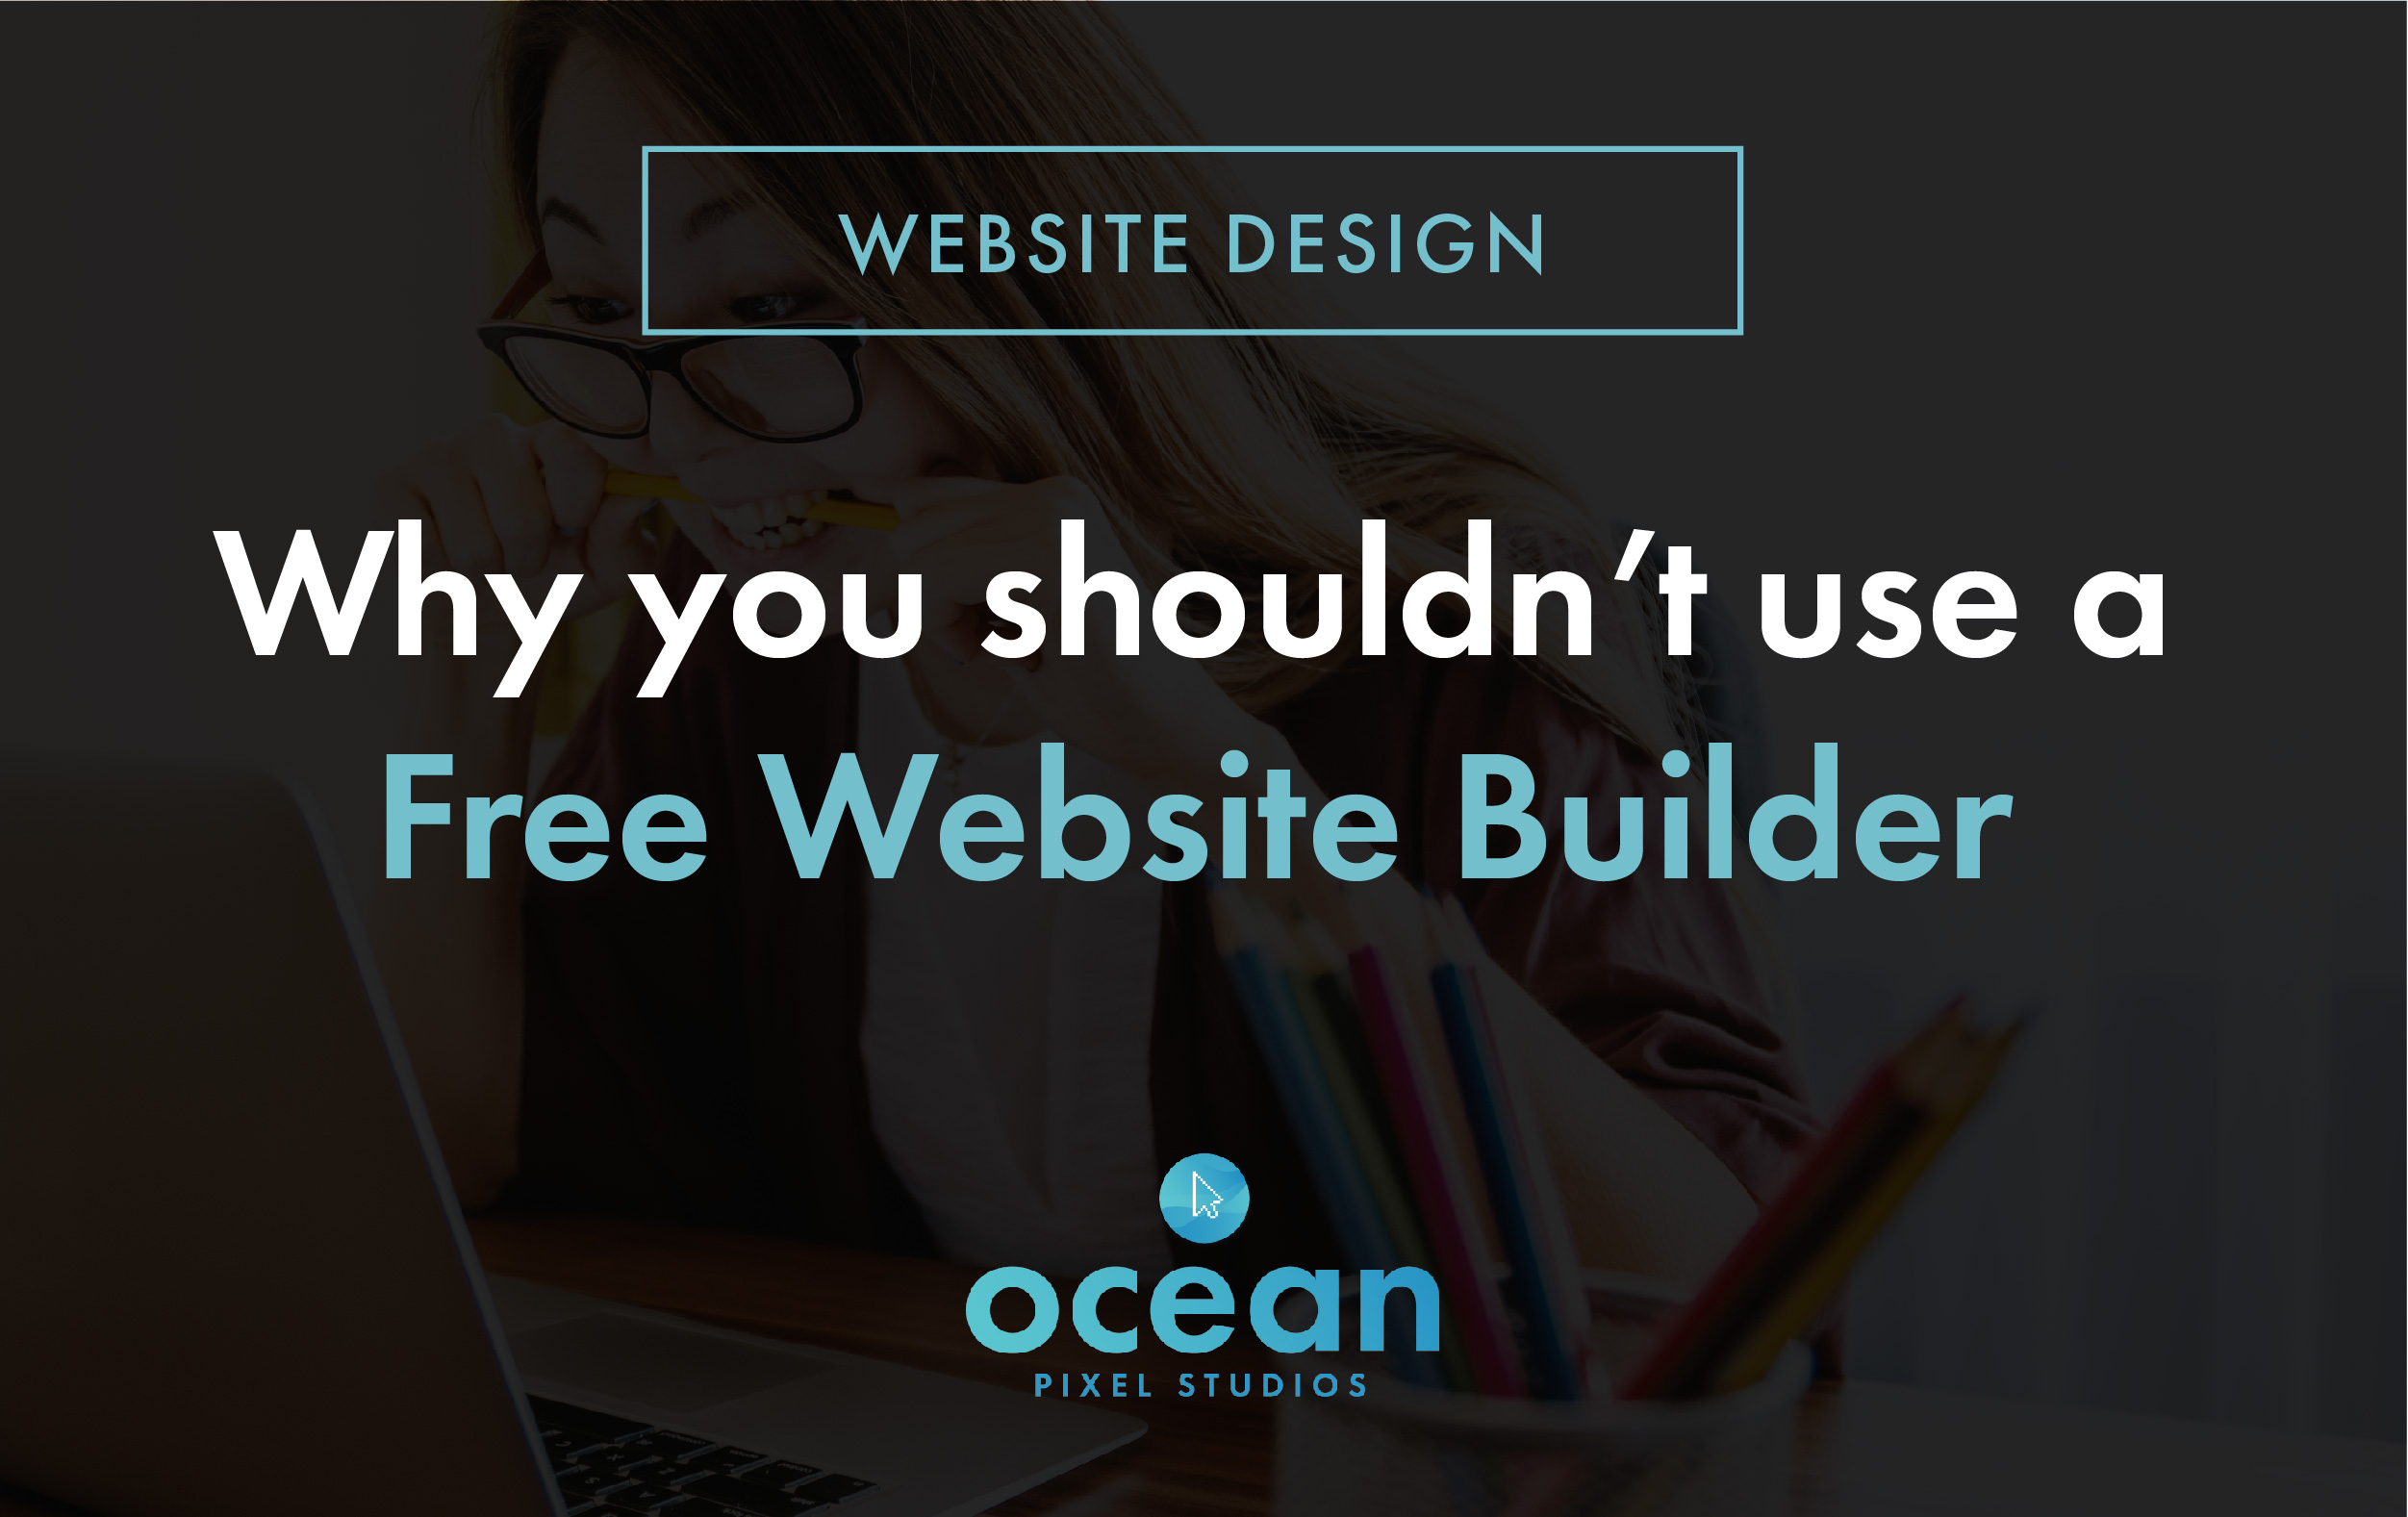 Why you shouldn't use a free website builder